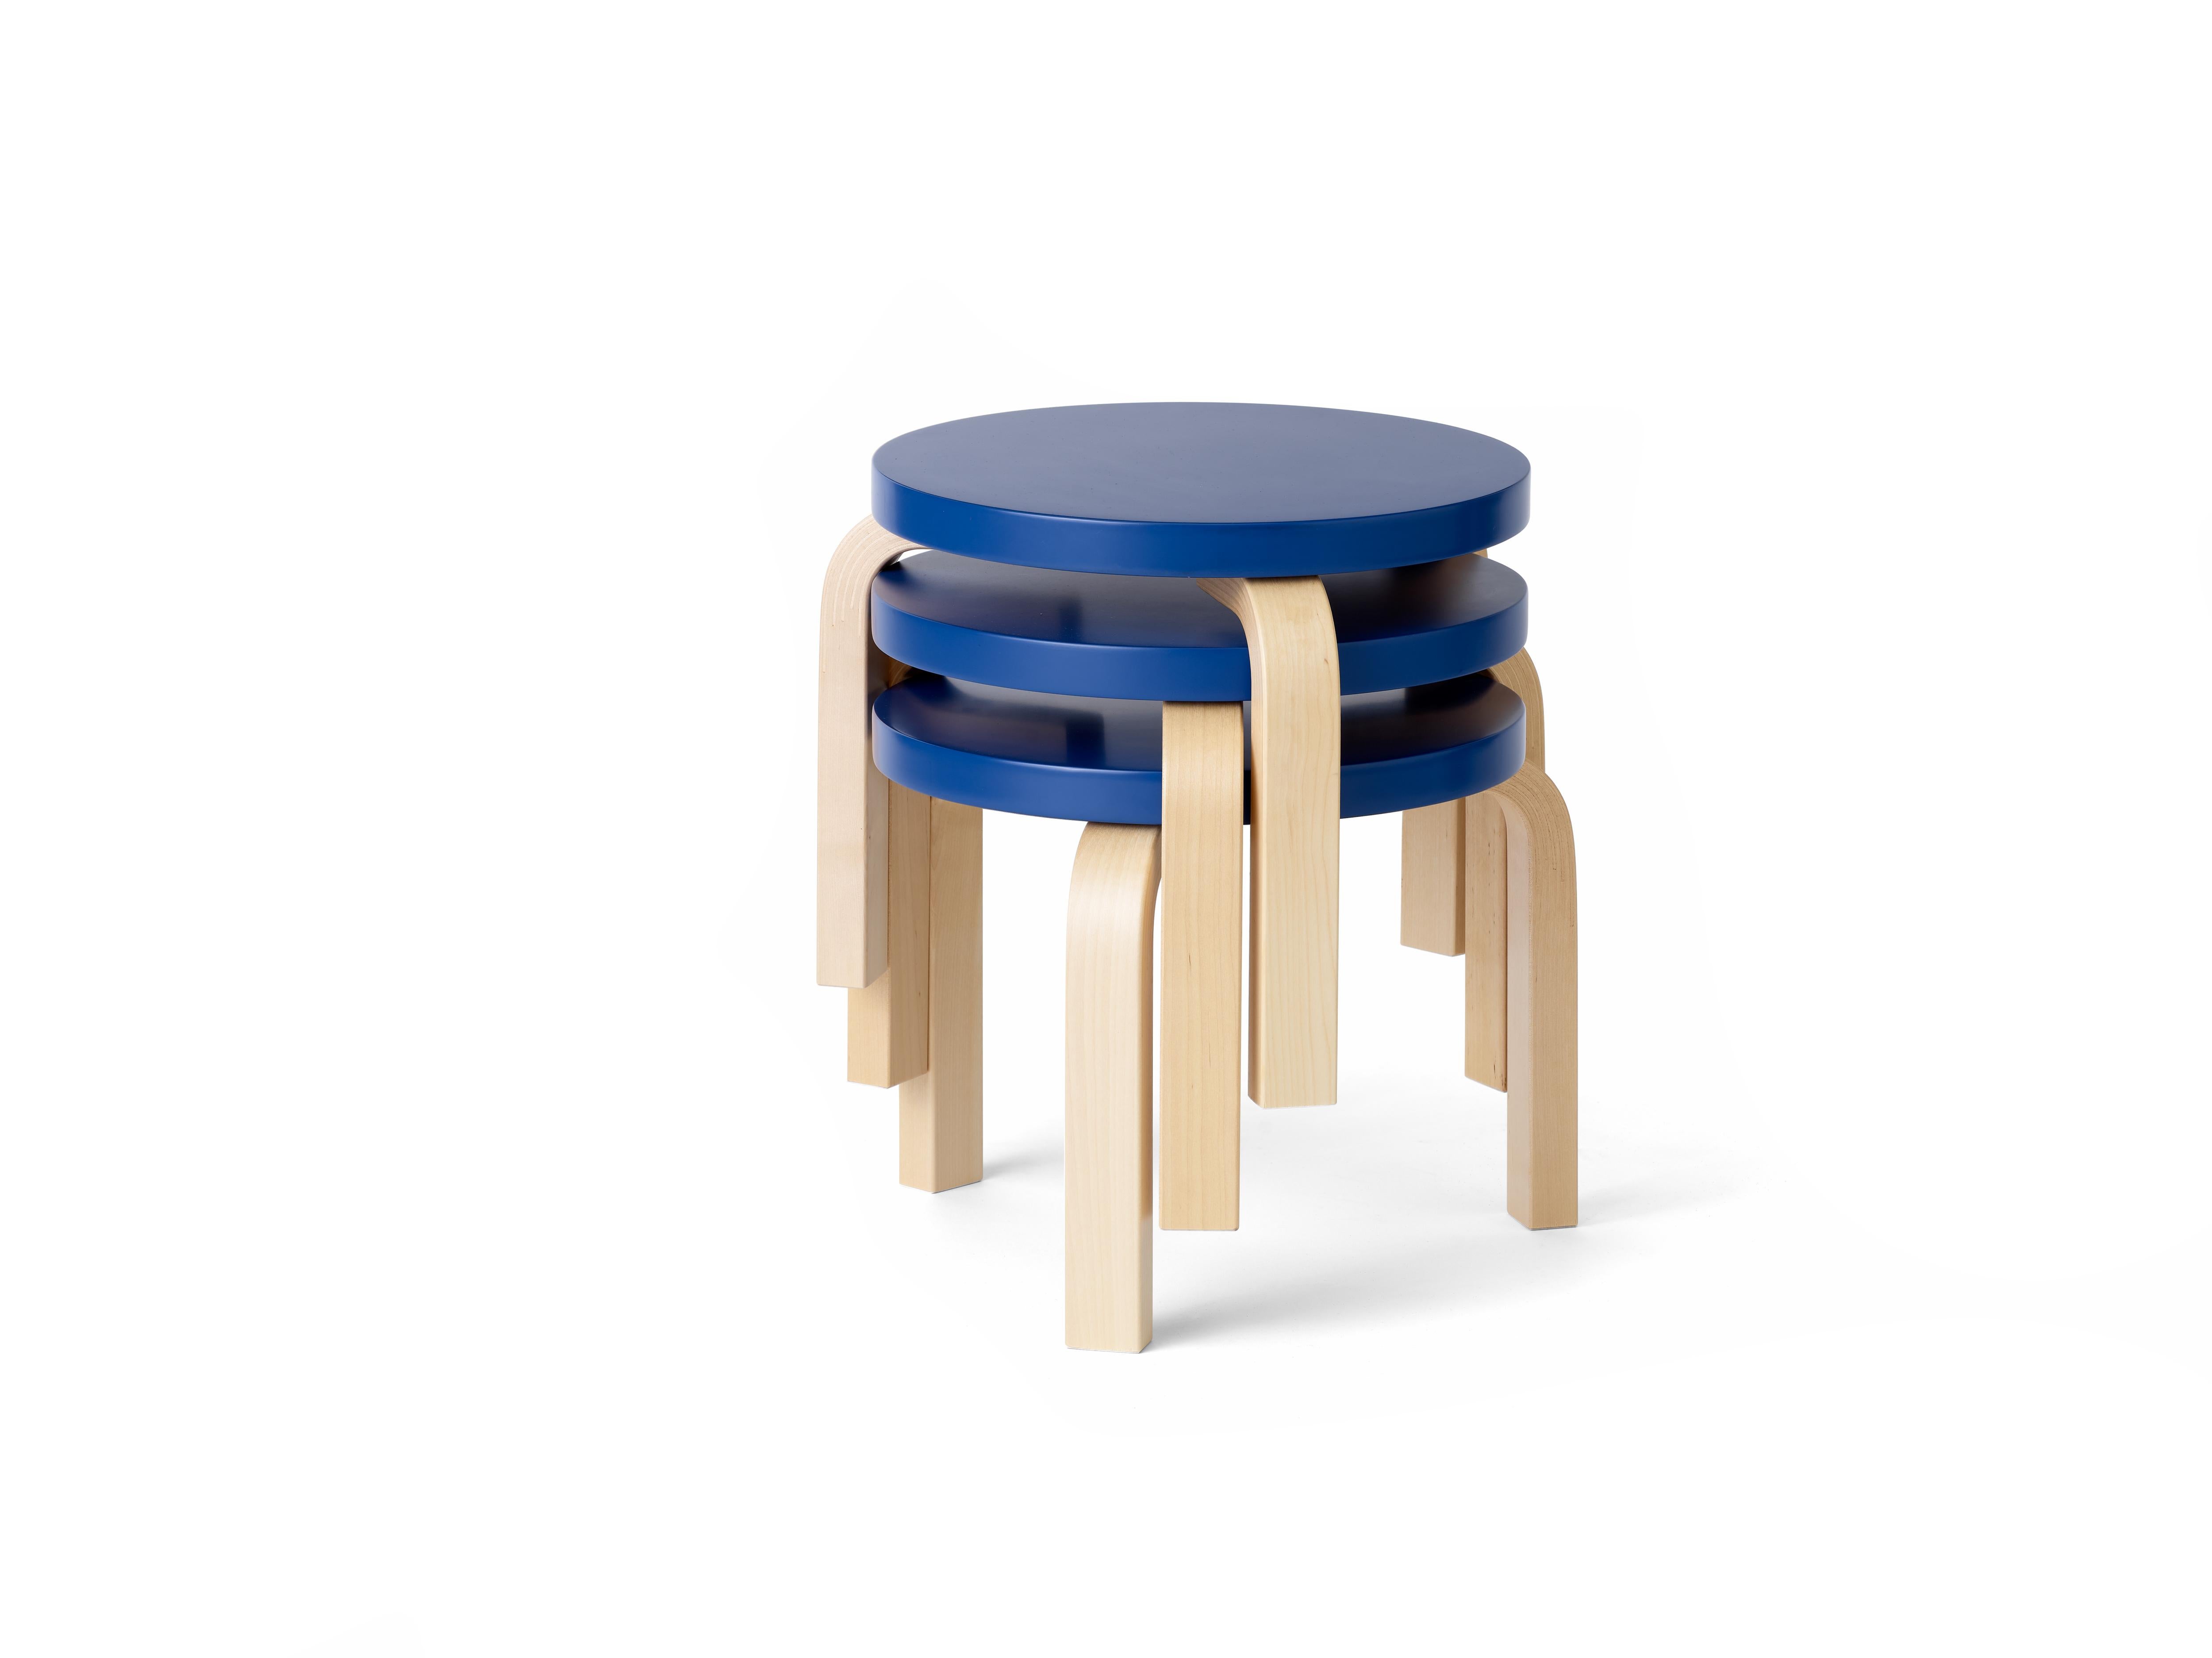 Limited Edition Low Stool 60 in Moonstone by Artek and Heath (Moderne)